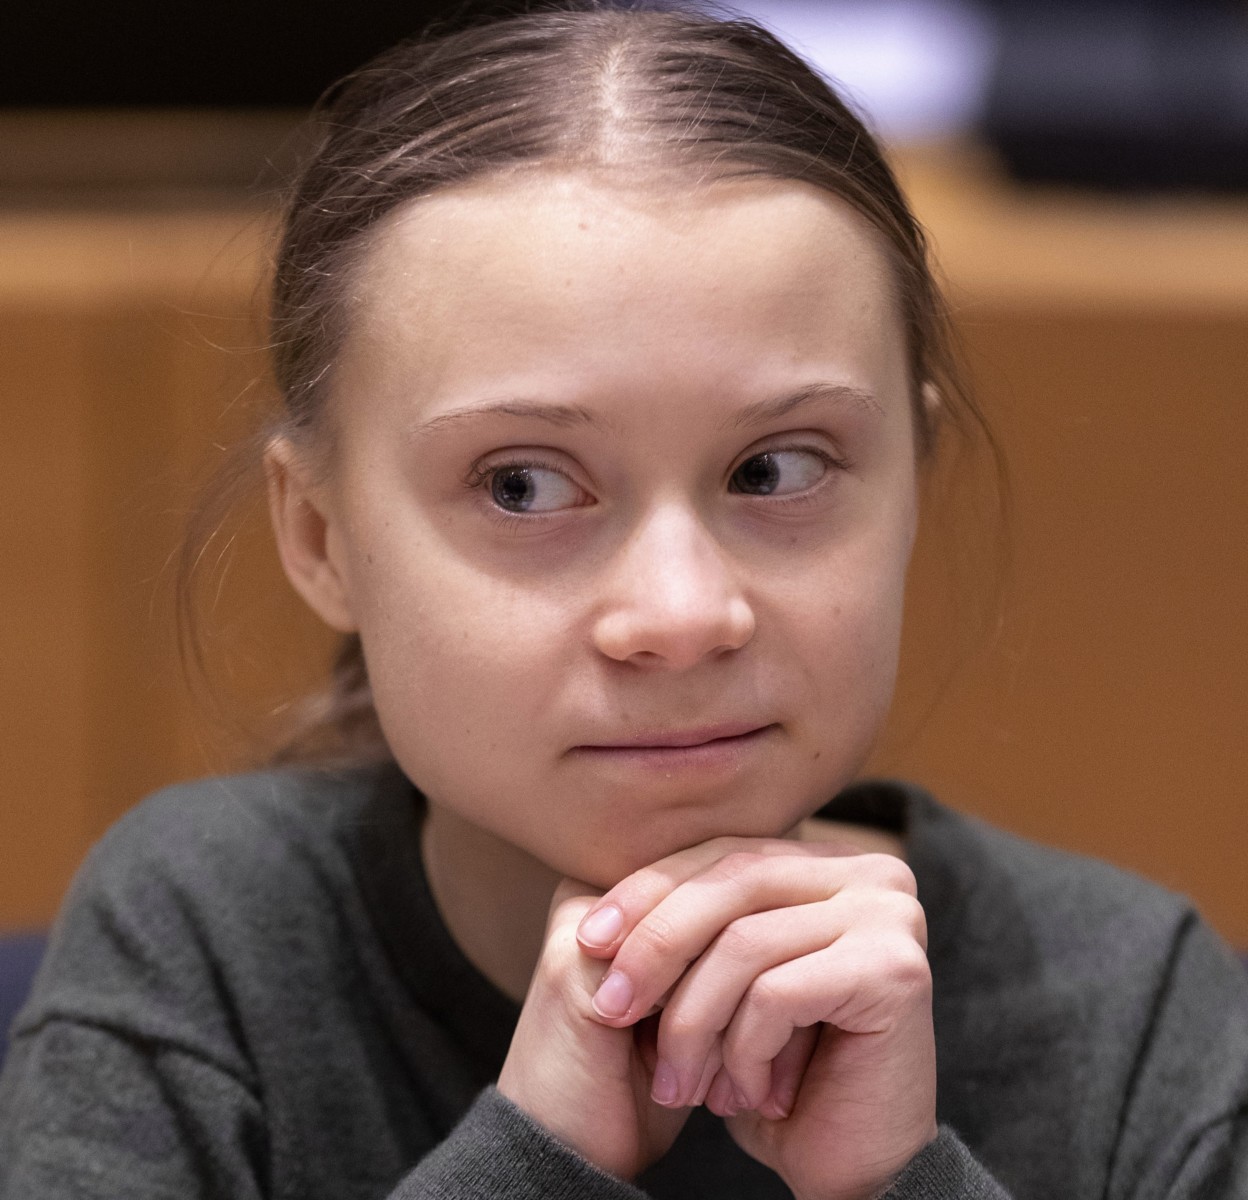 The jokers fooled him into thinking he was speaking to climate activist Greta Thunberg